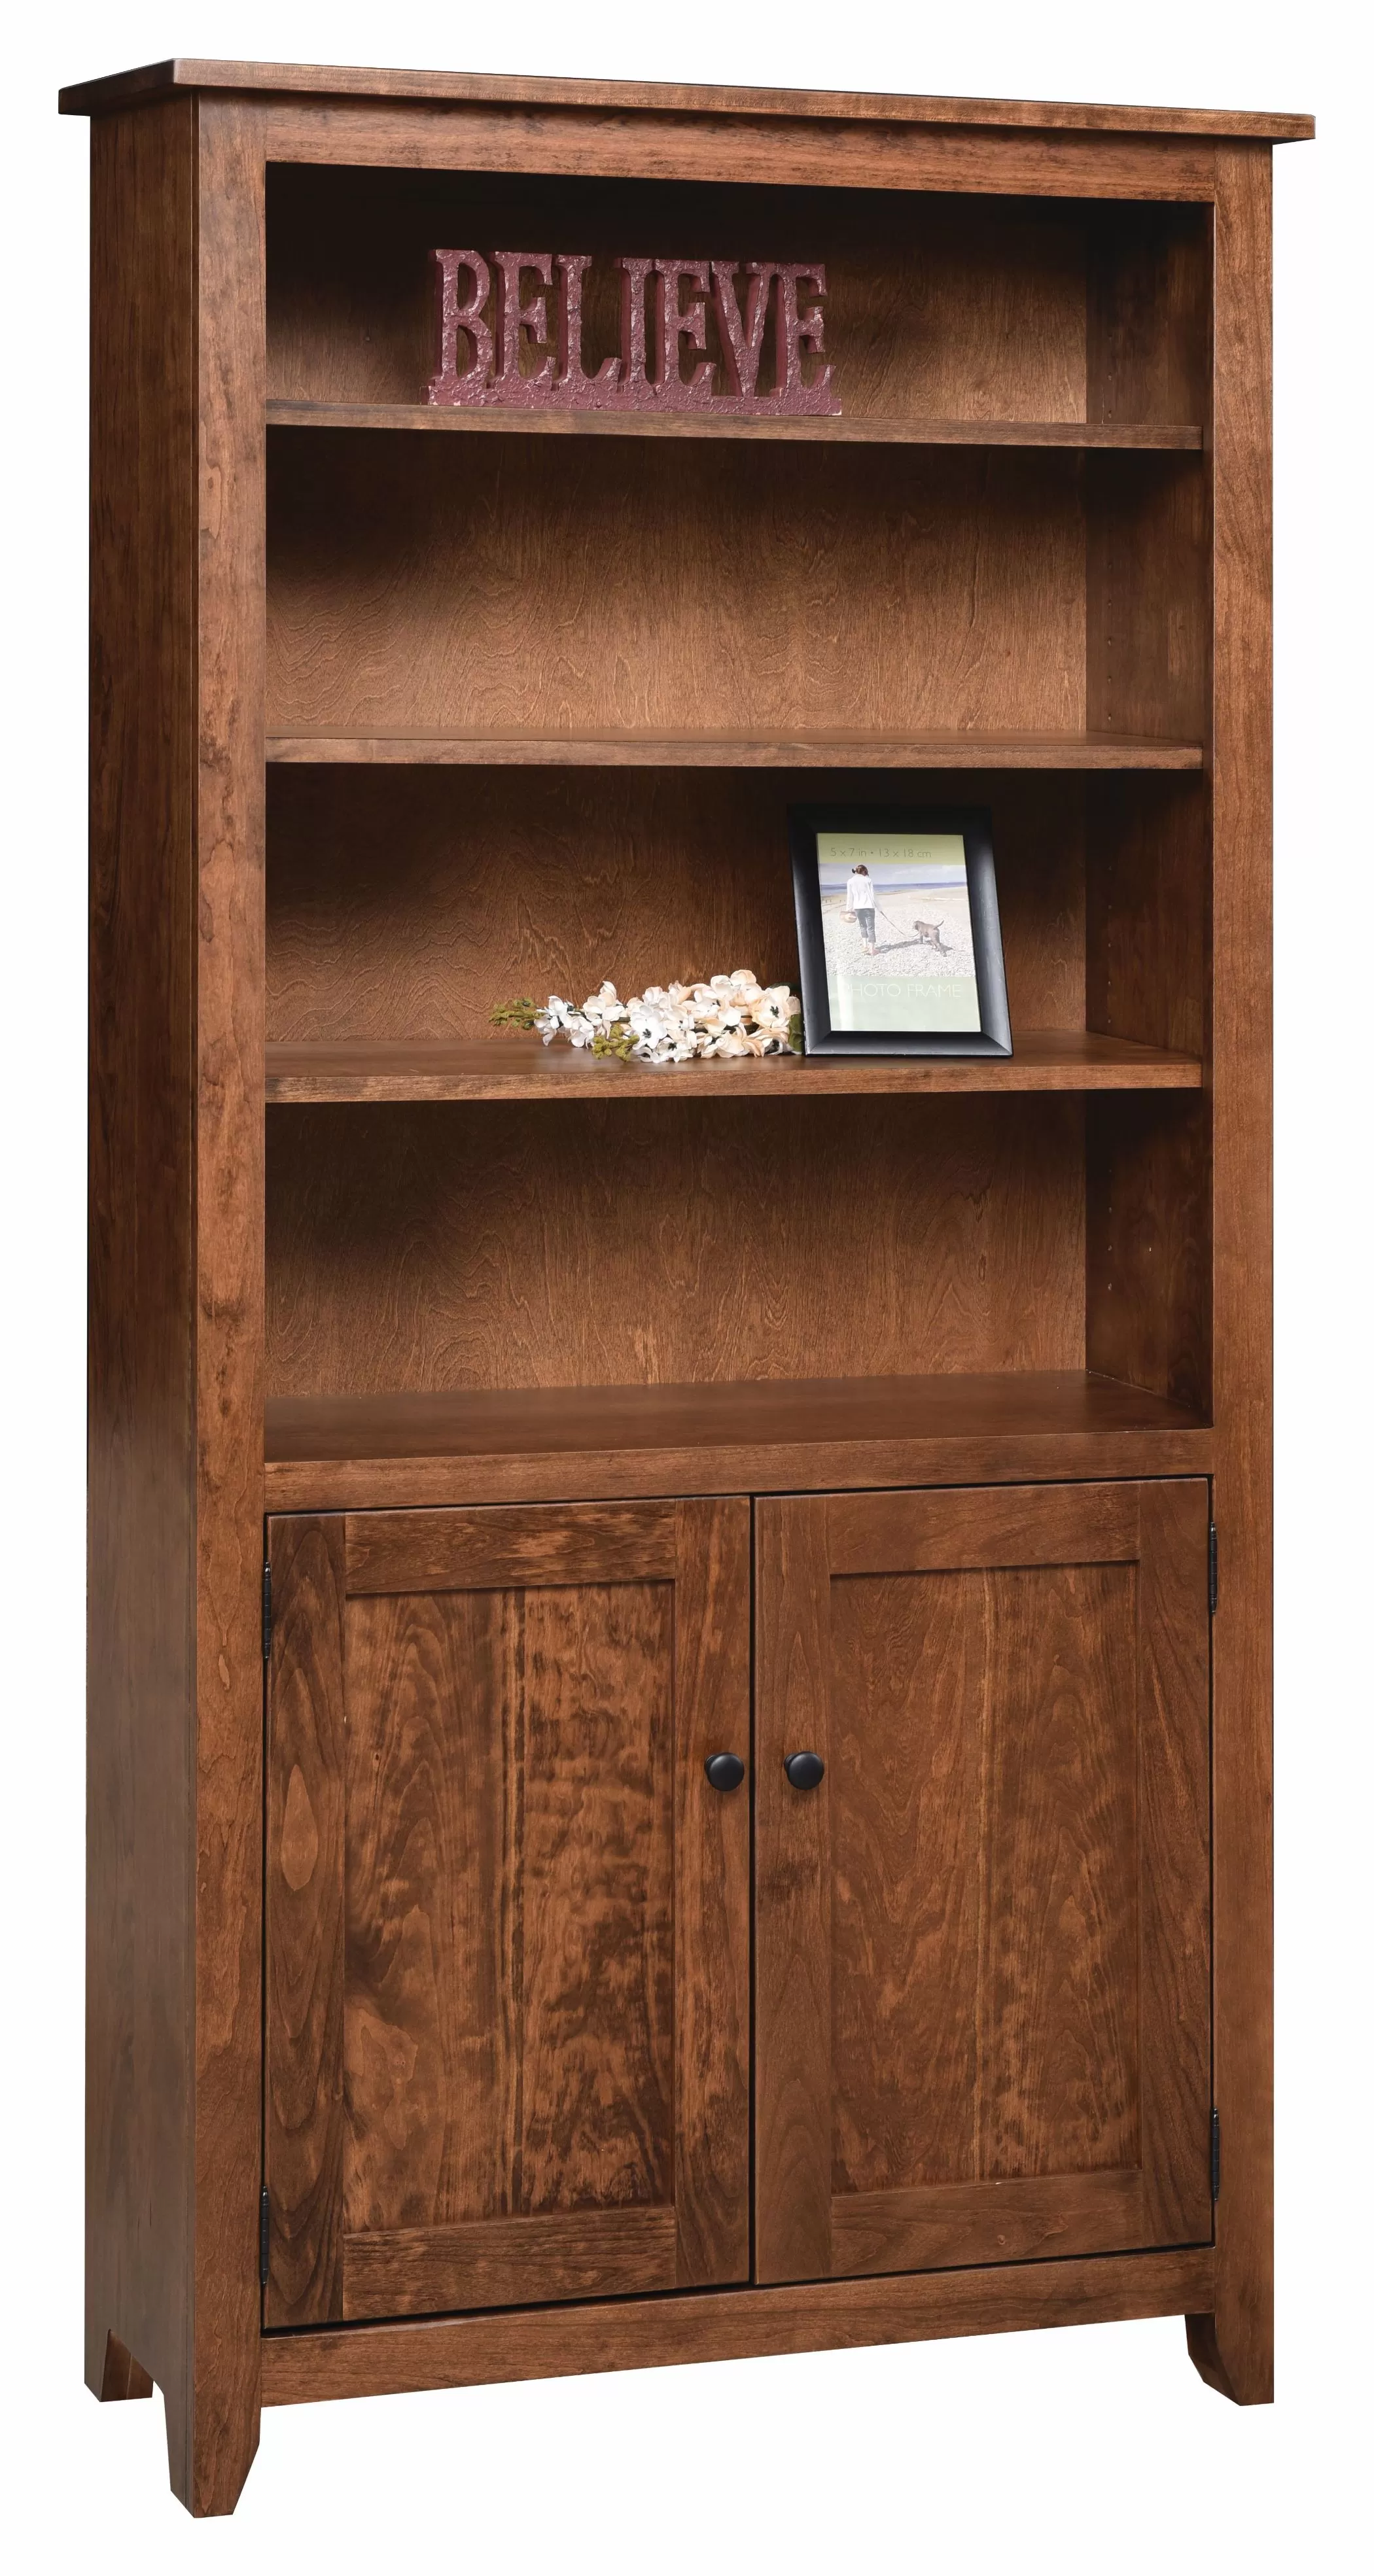 36" Modern Mission Bookcase with Doors